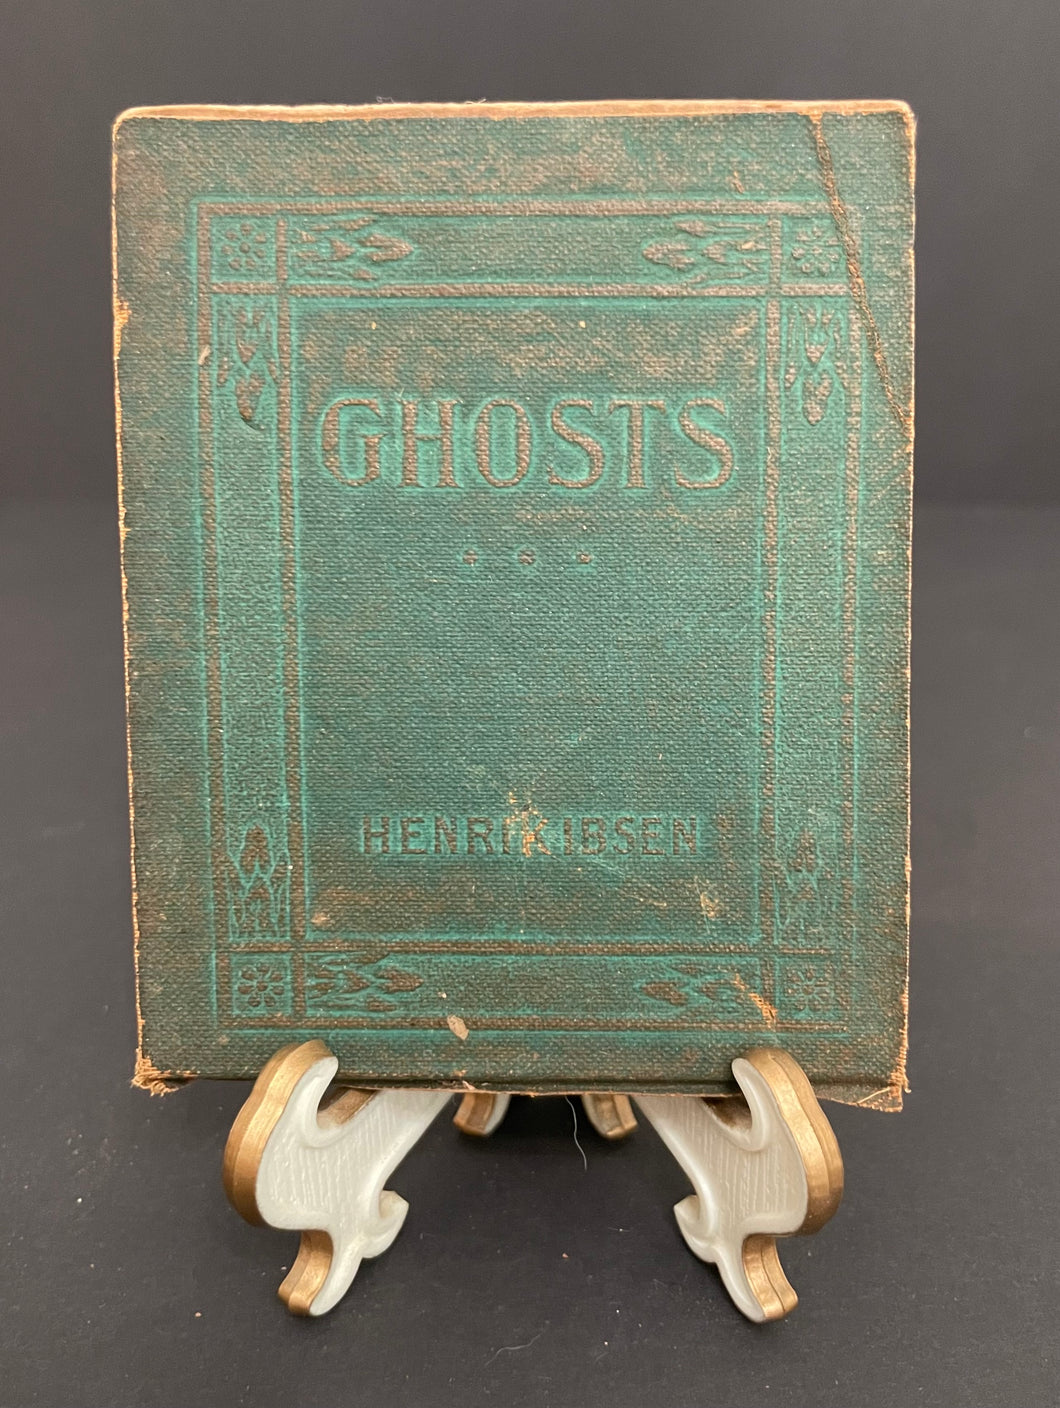 Antique Little Leather Library “Ghosts ” by Henri Ibsen Book